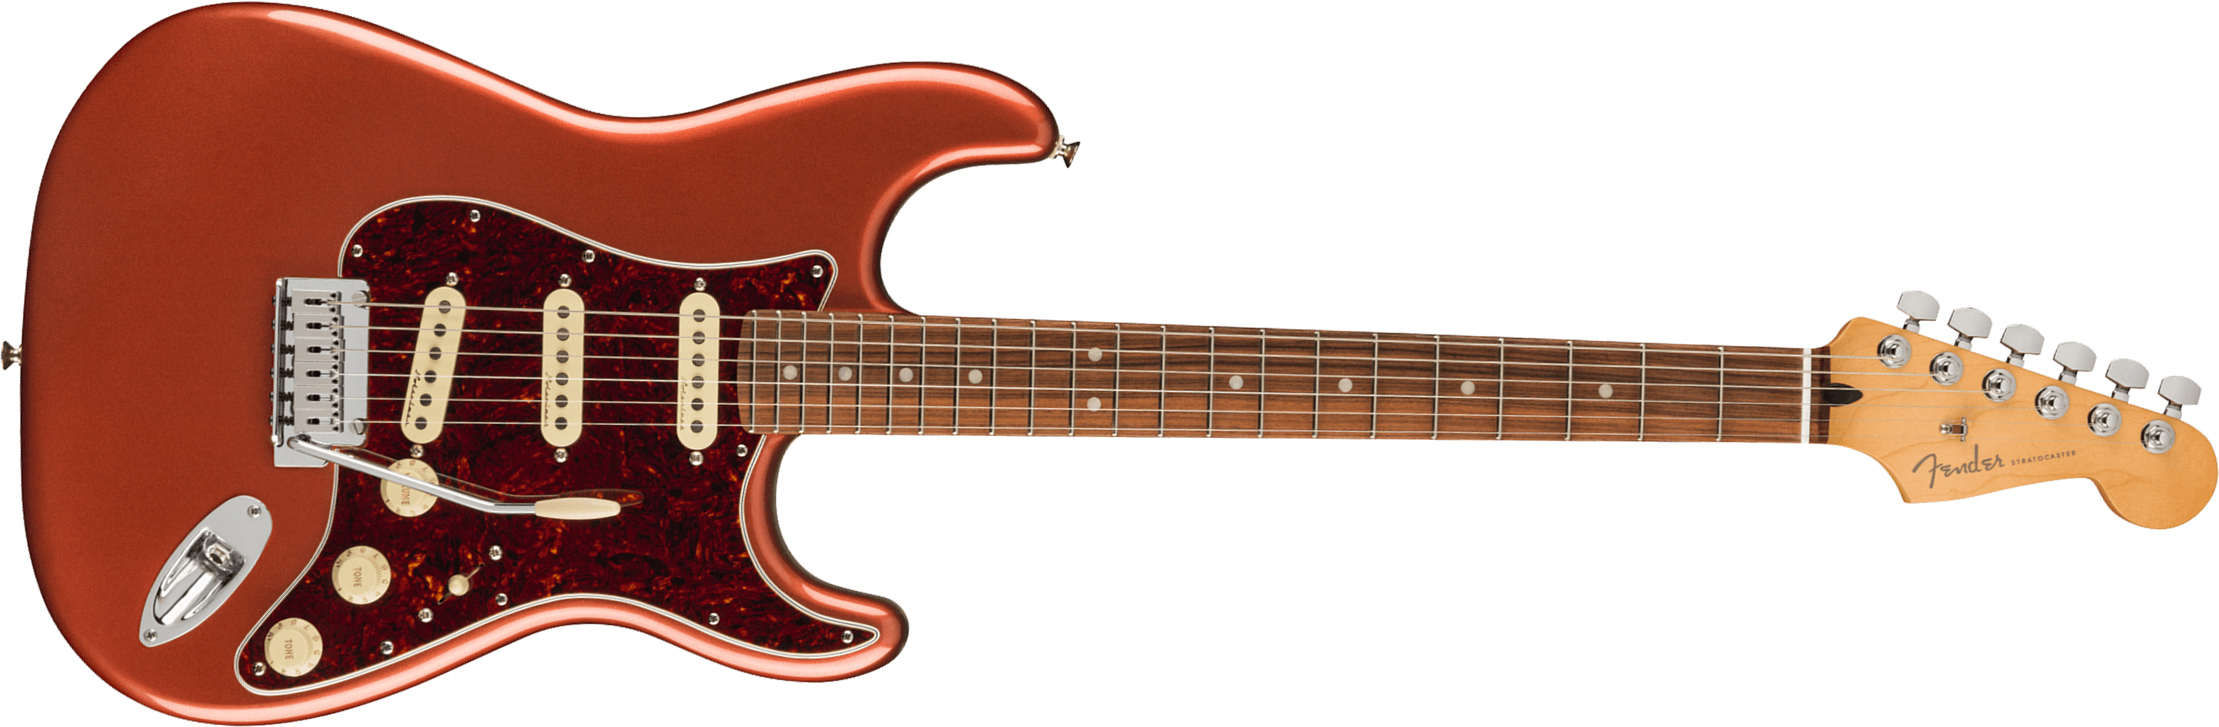 Fender Strat Player Plus Mex 3s Trem Pf - Aged Candy Apple Red - Str shape electric guitar - Main picture